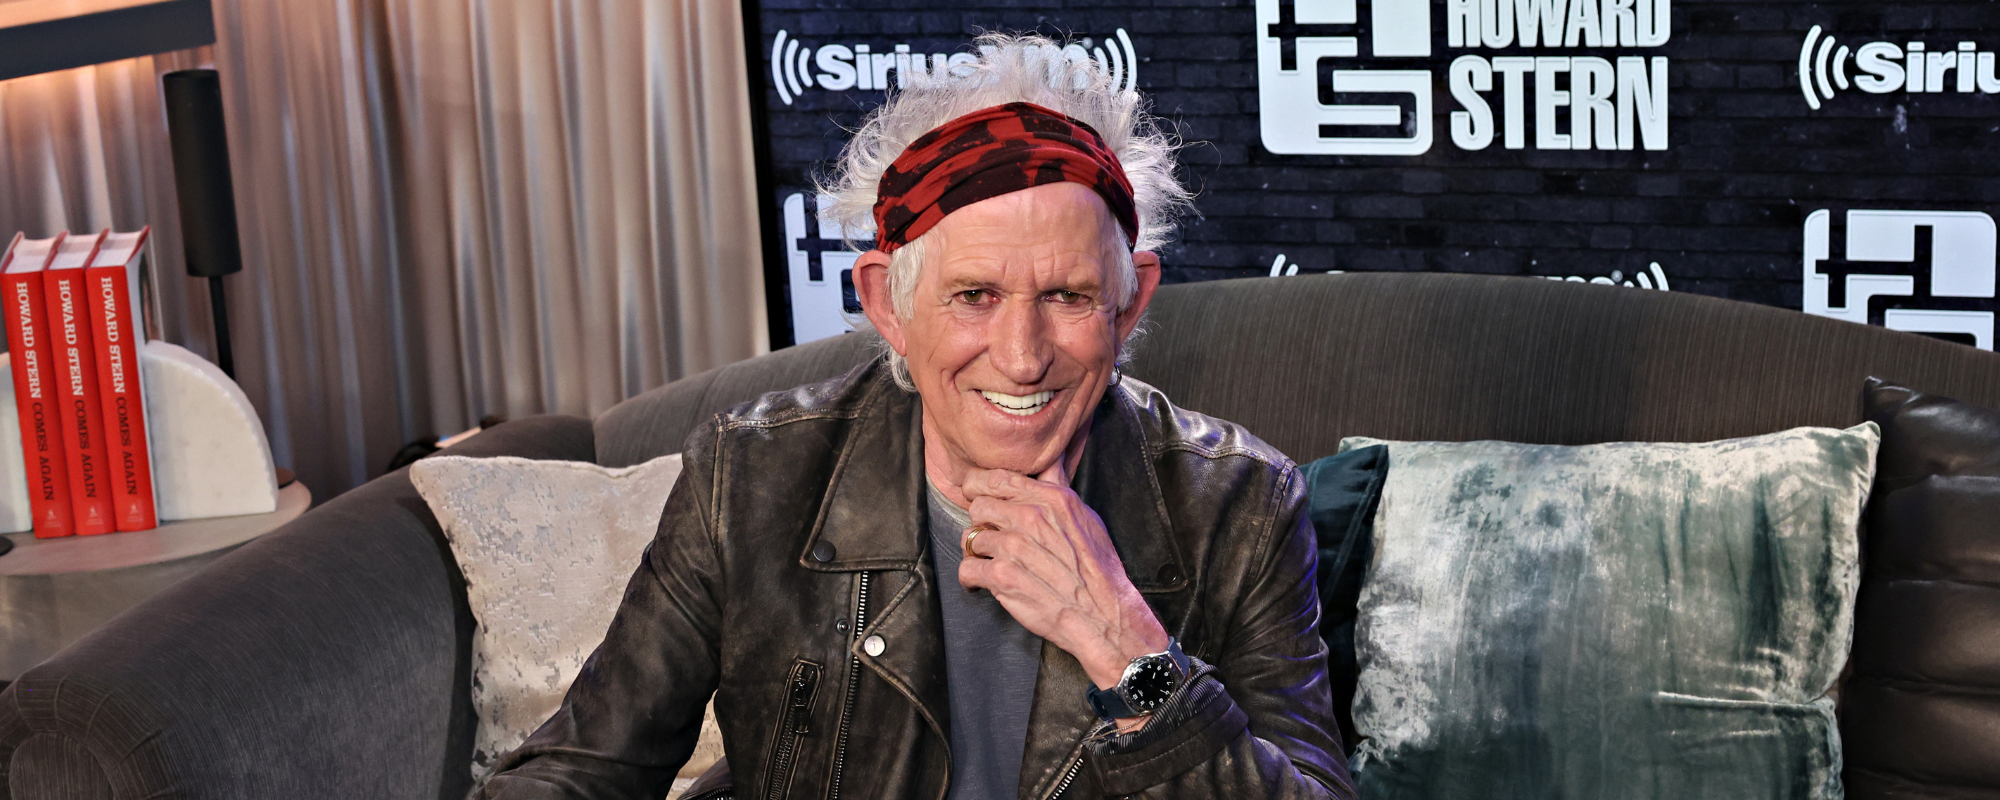 3 Classic Rock Albums Keith Richards Doesn’t Think Very Highly Of